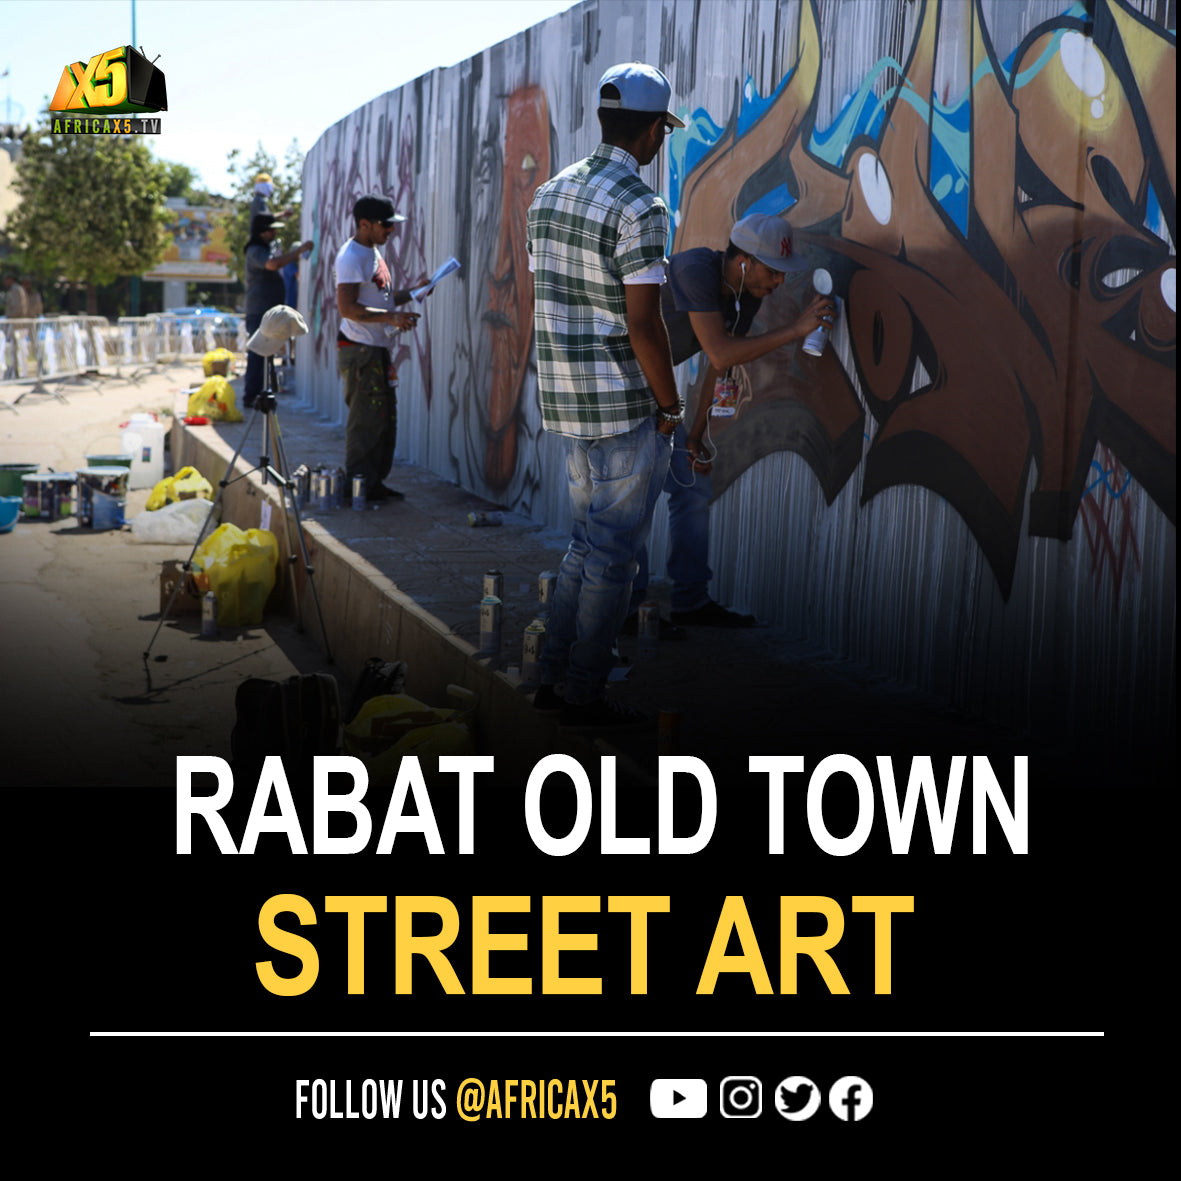 The narrow streets and alleyways of Rabat's old town in Morocco have been turned into an open air art gallery.